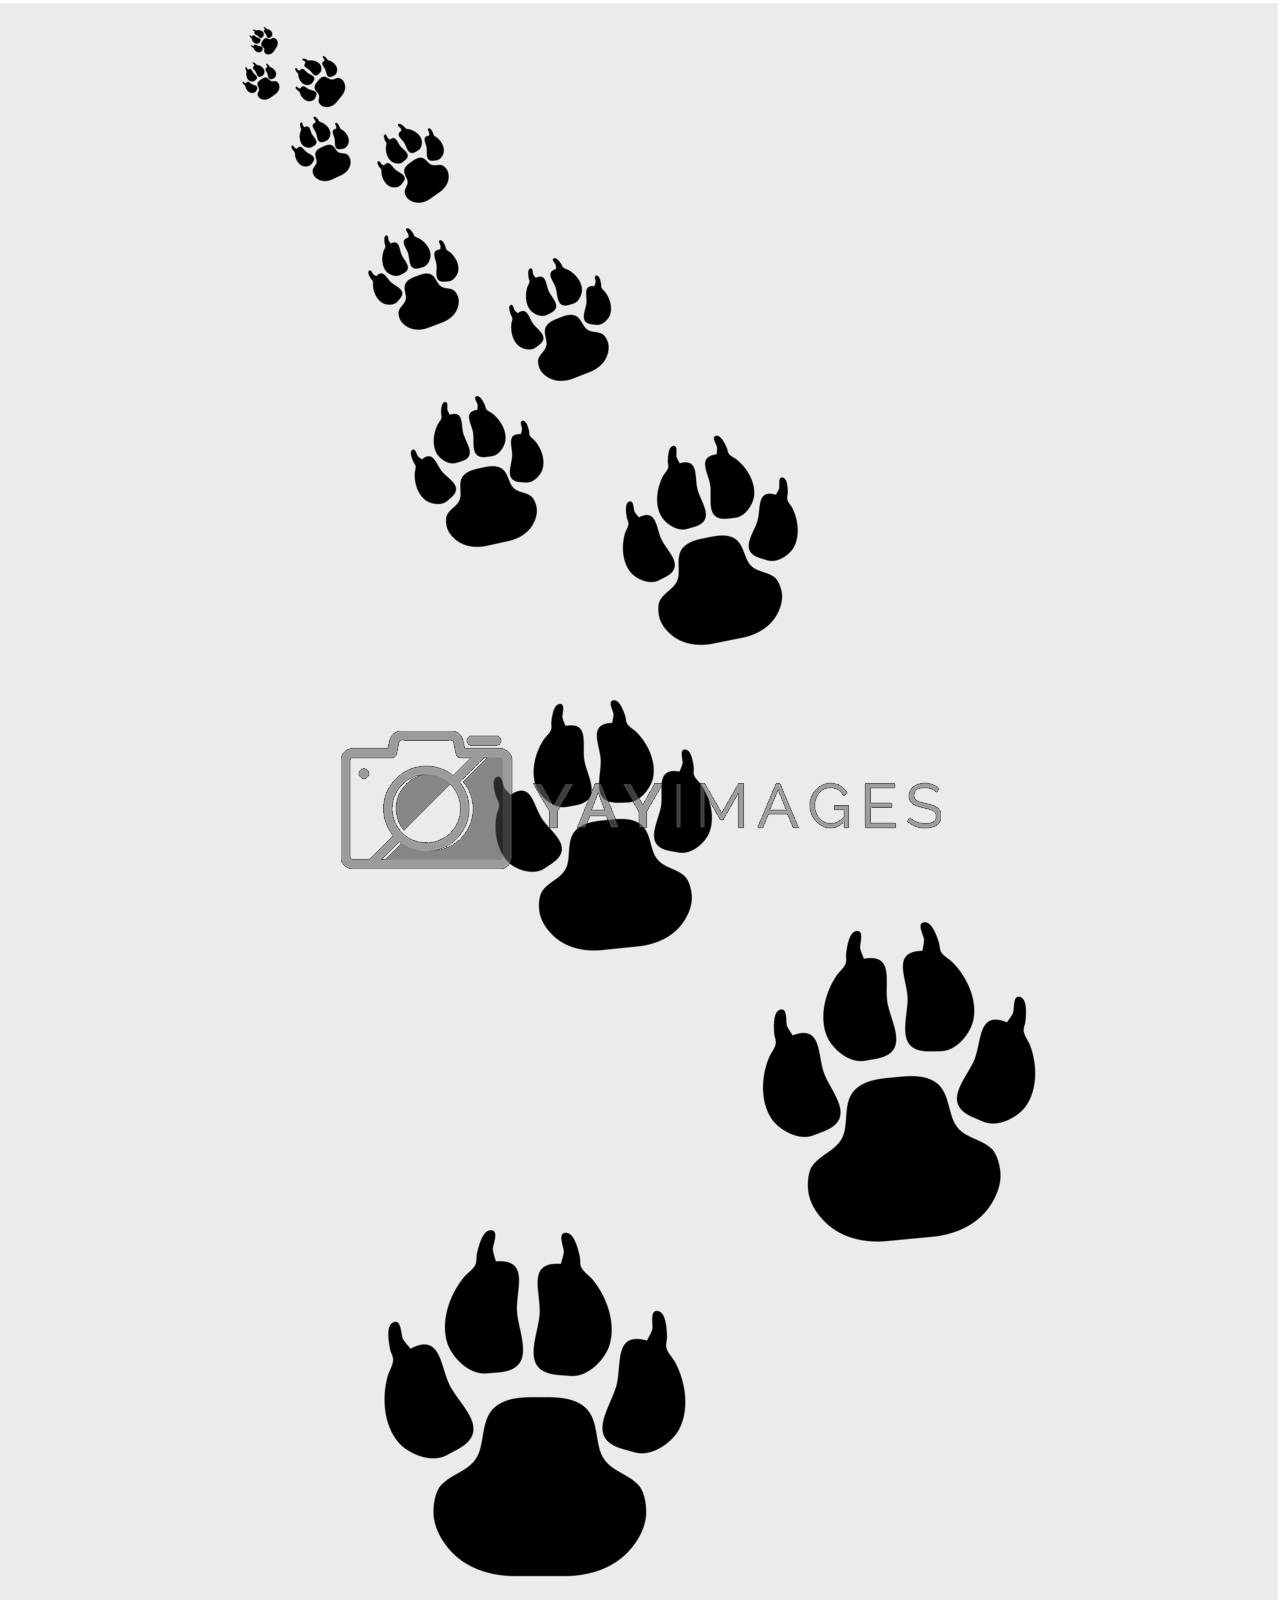 Royalty free image of footprints of dogs 2 by ratkomat